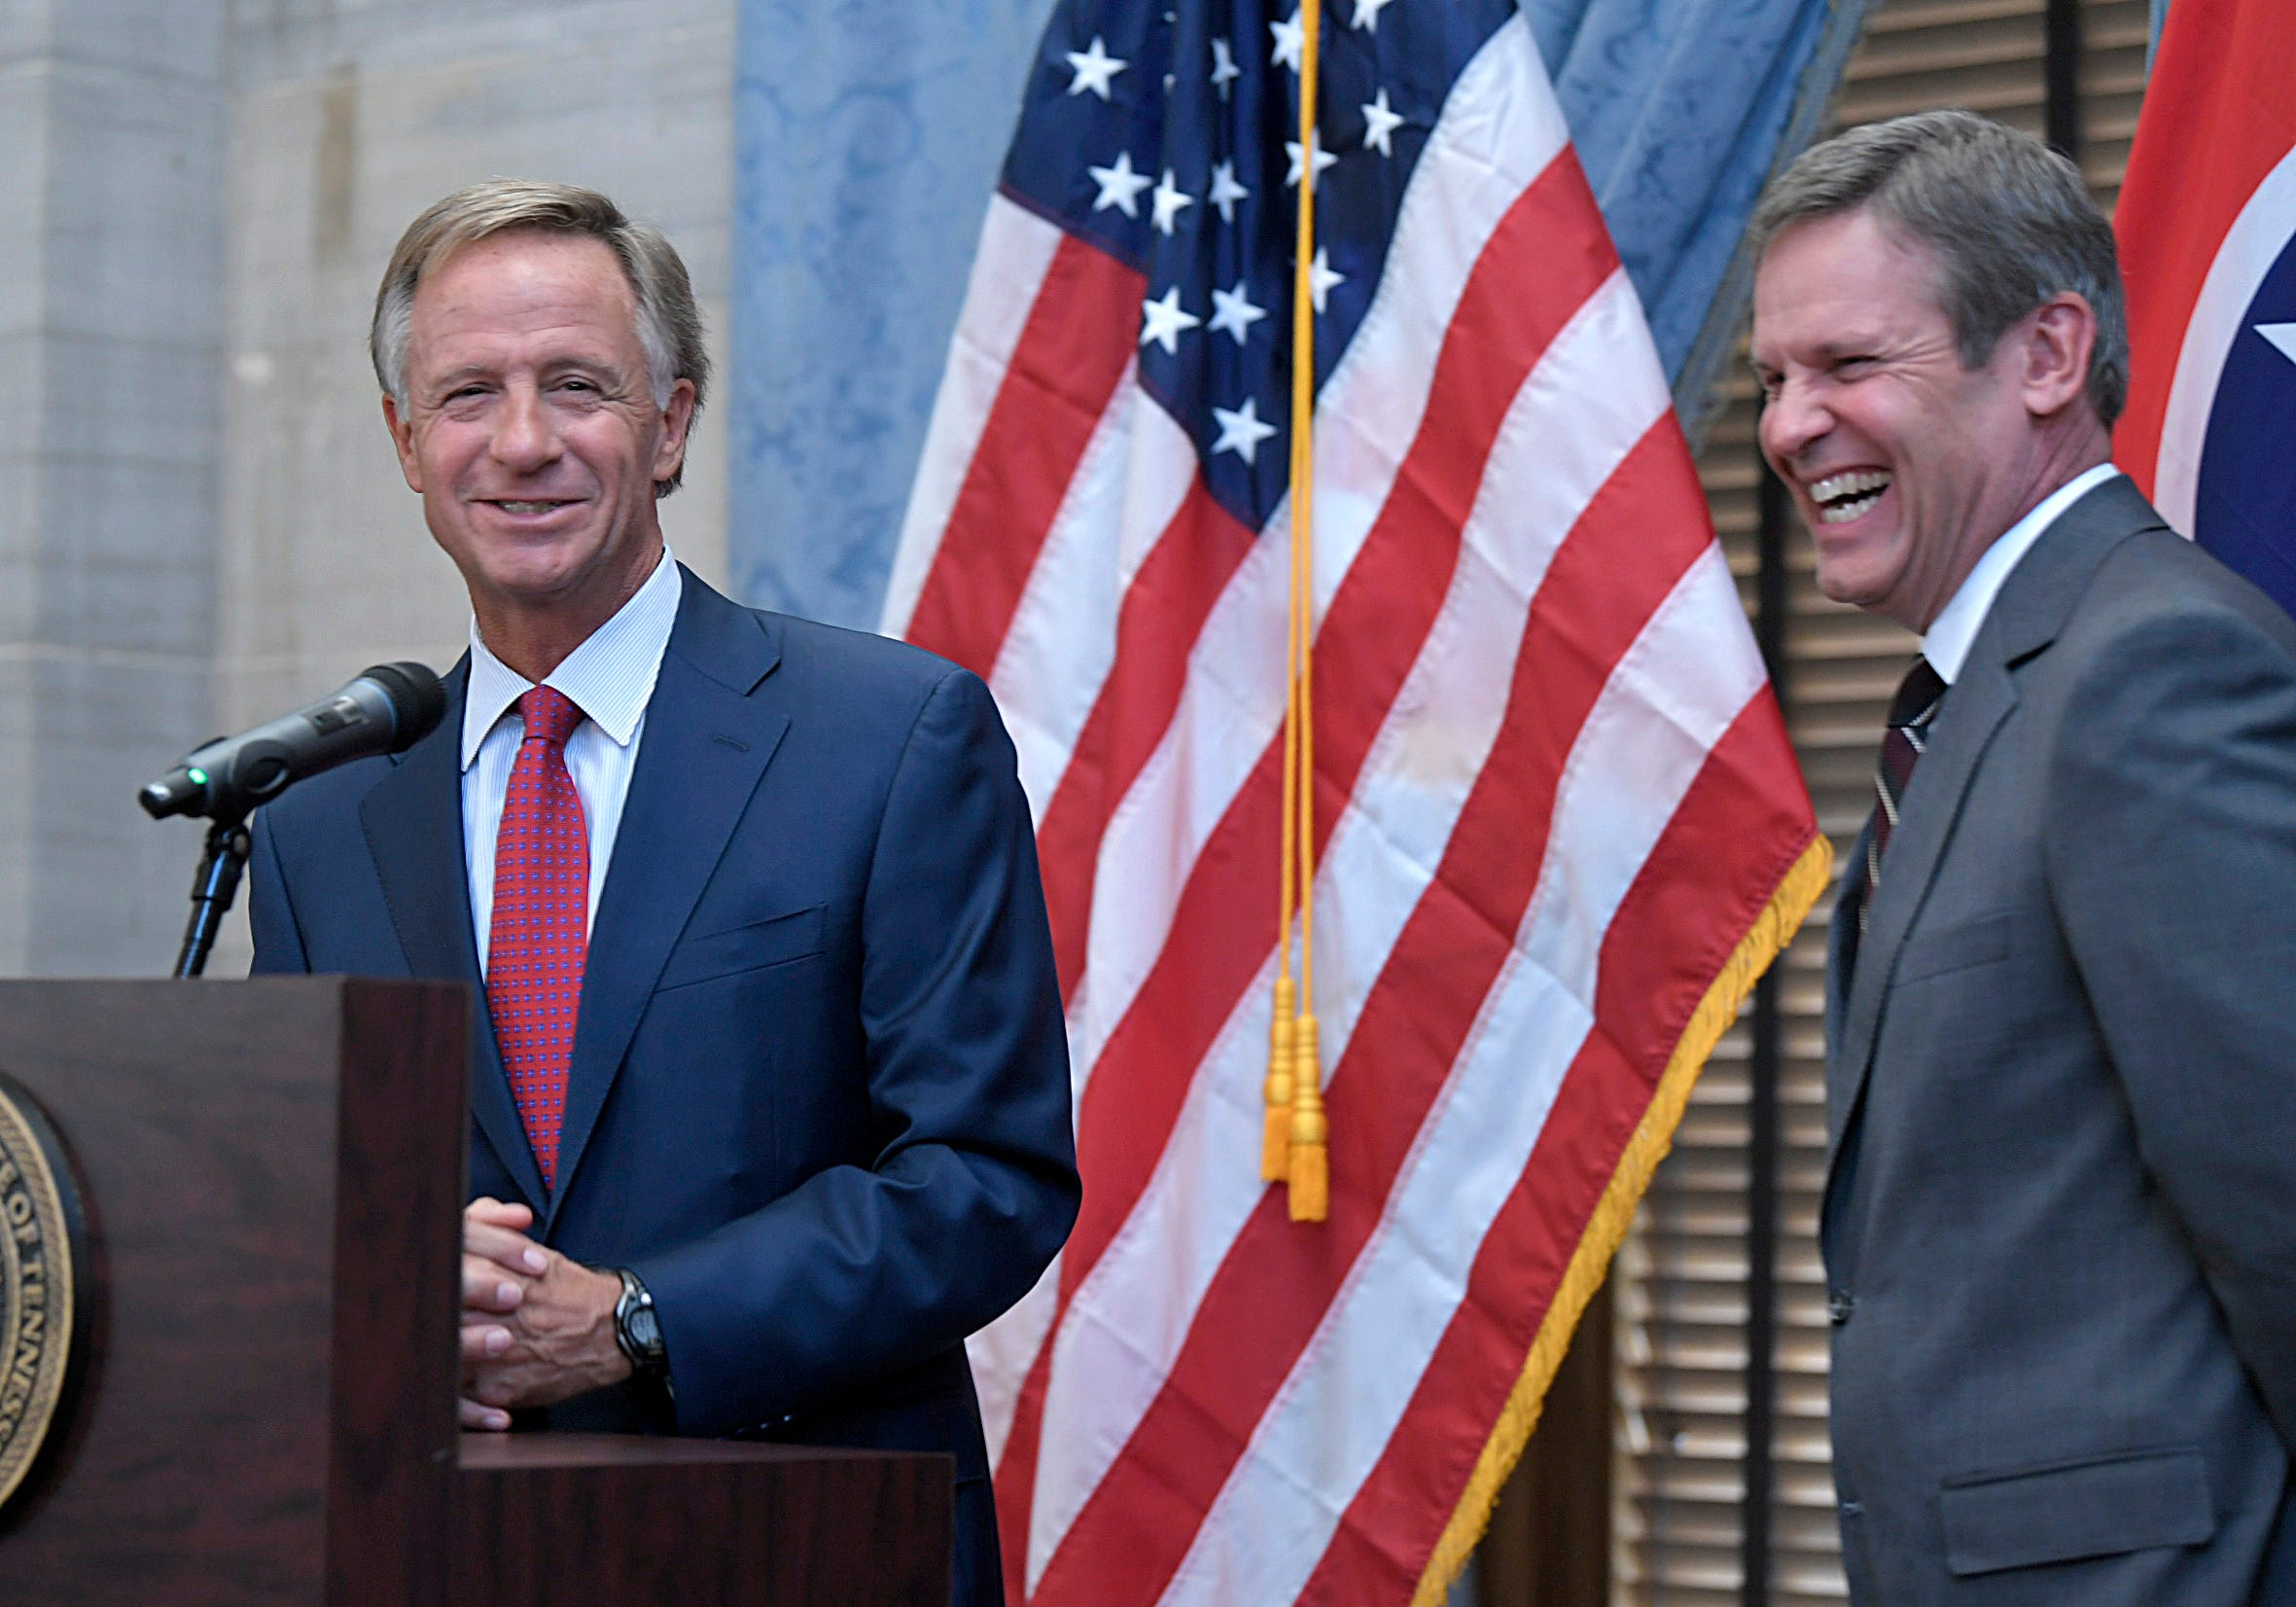 Midterm elections: How Bill Lee spent first day as Tennessee governor-elect